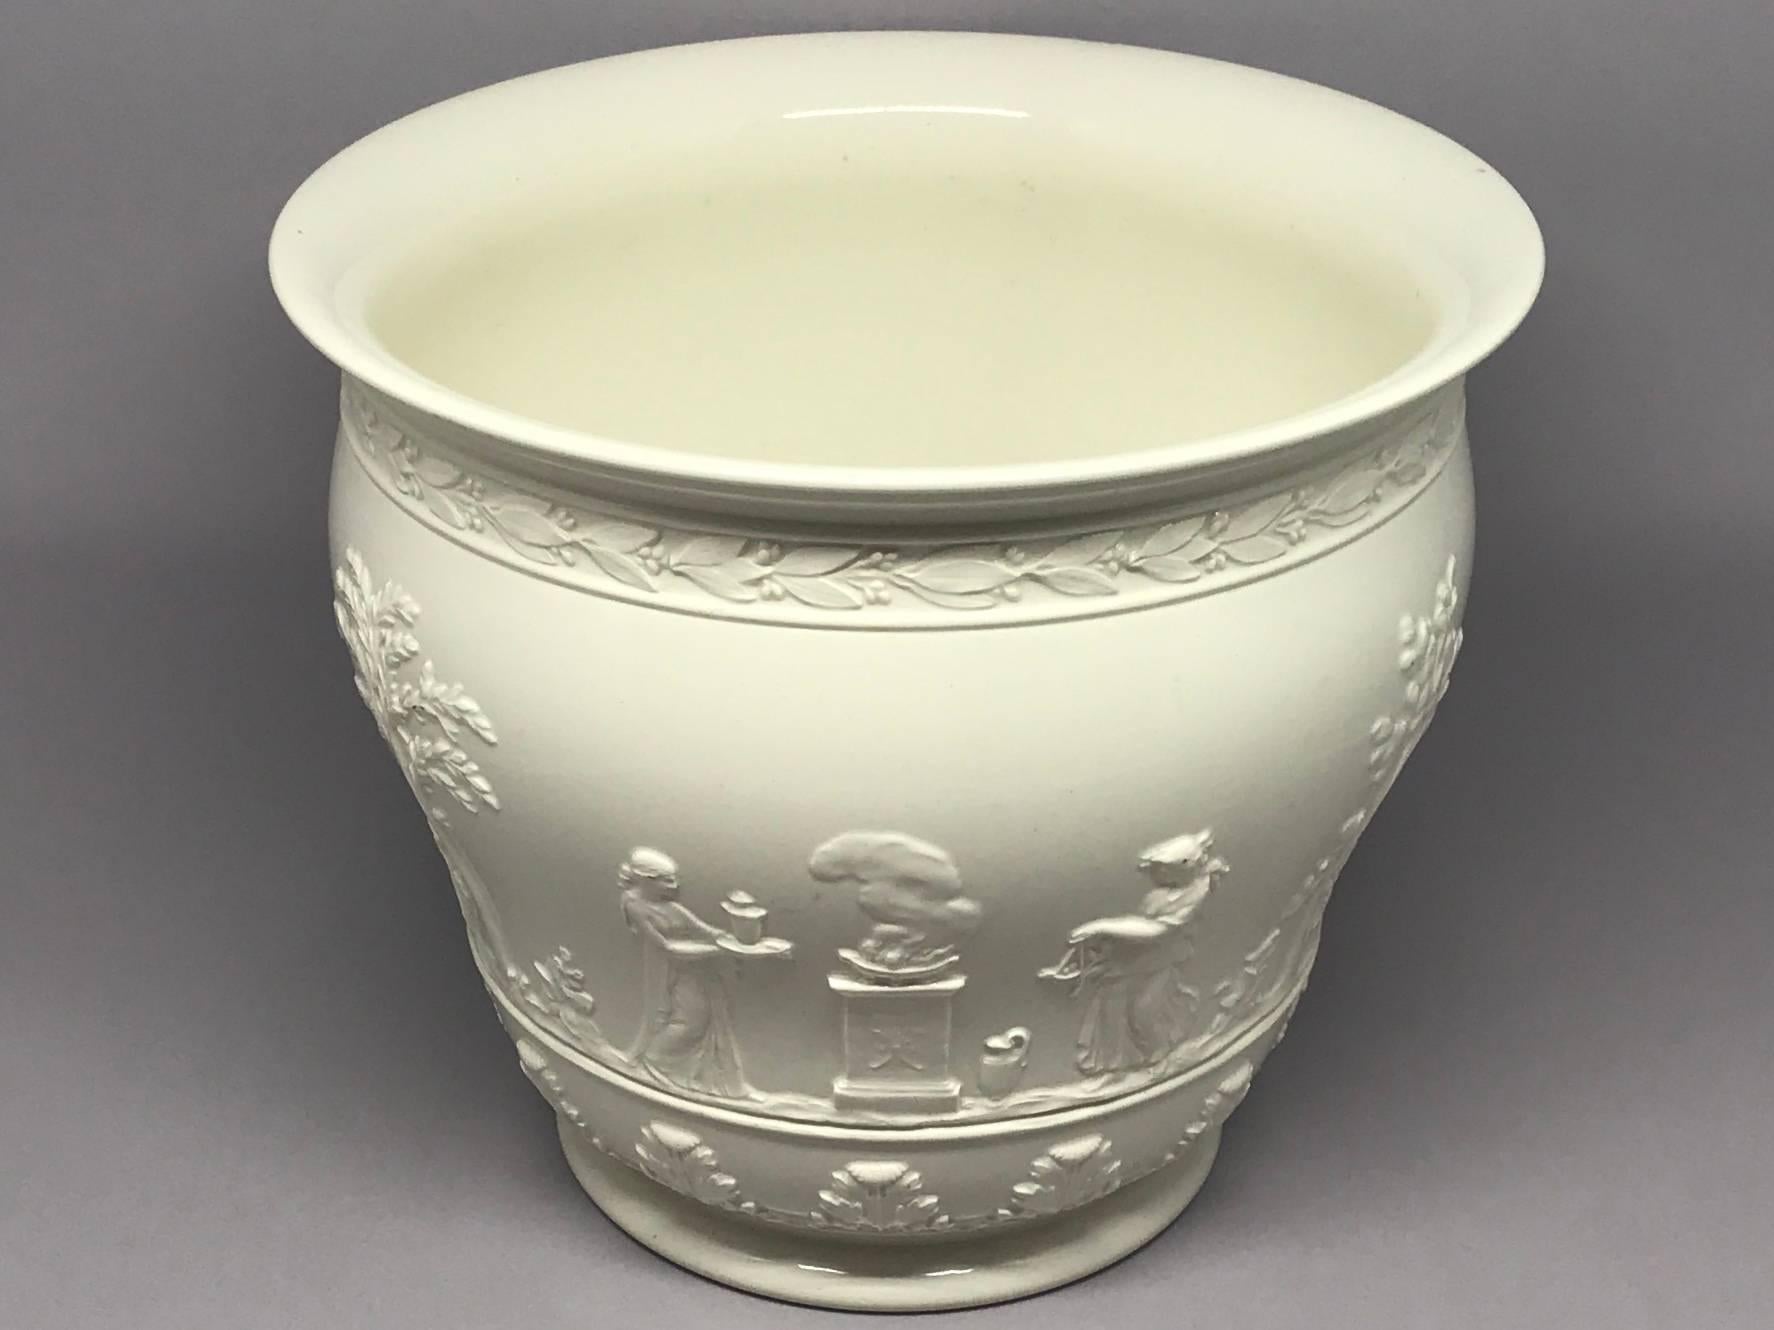 Neoclassical White Wedgwood Cachepot